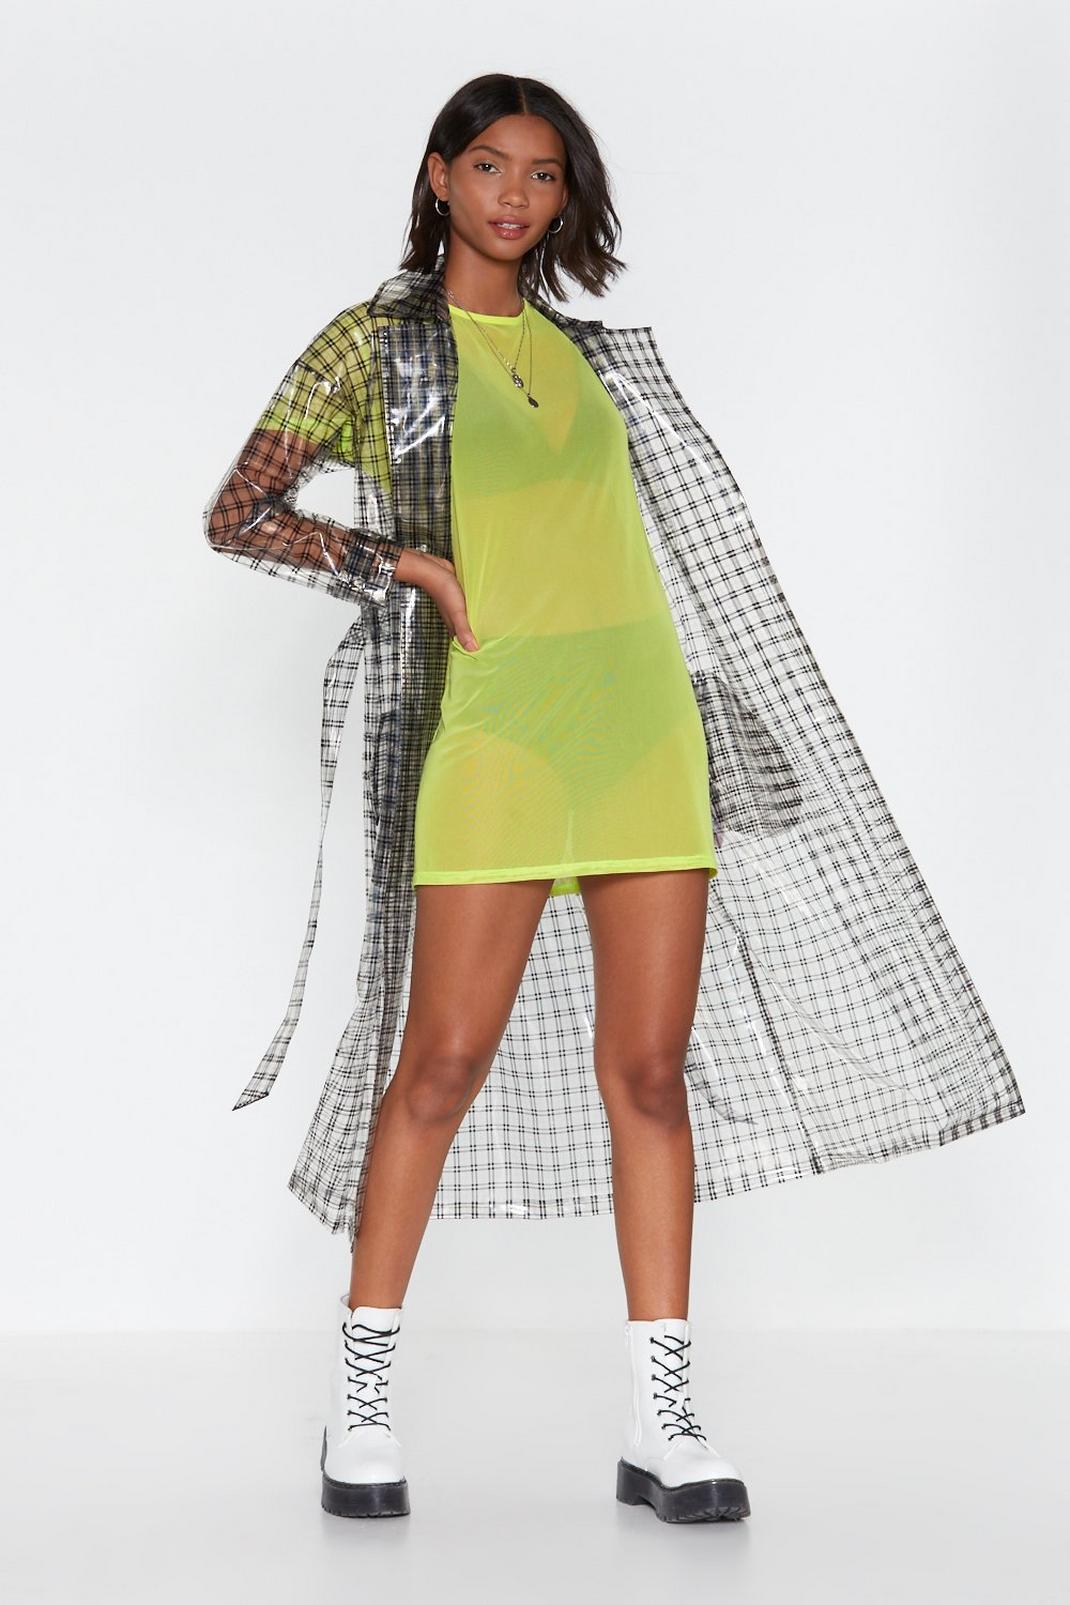 See Clearly Now Mesh Mini Dress image number 1